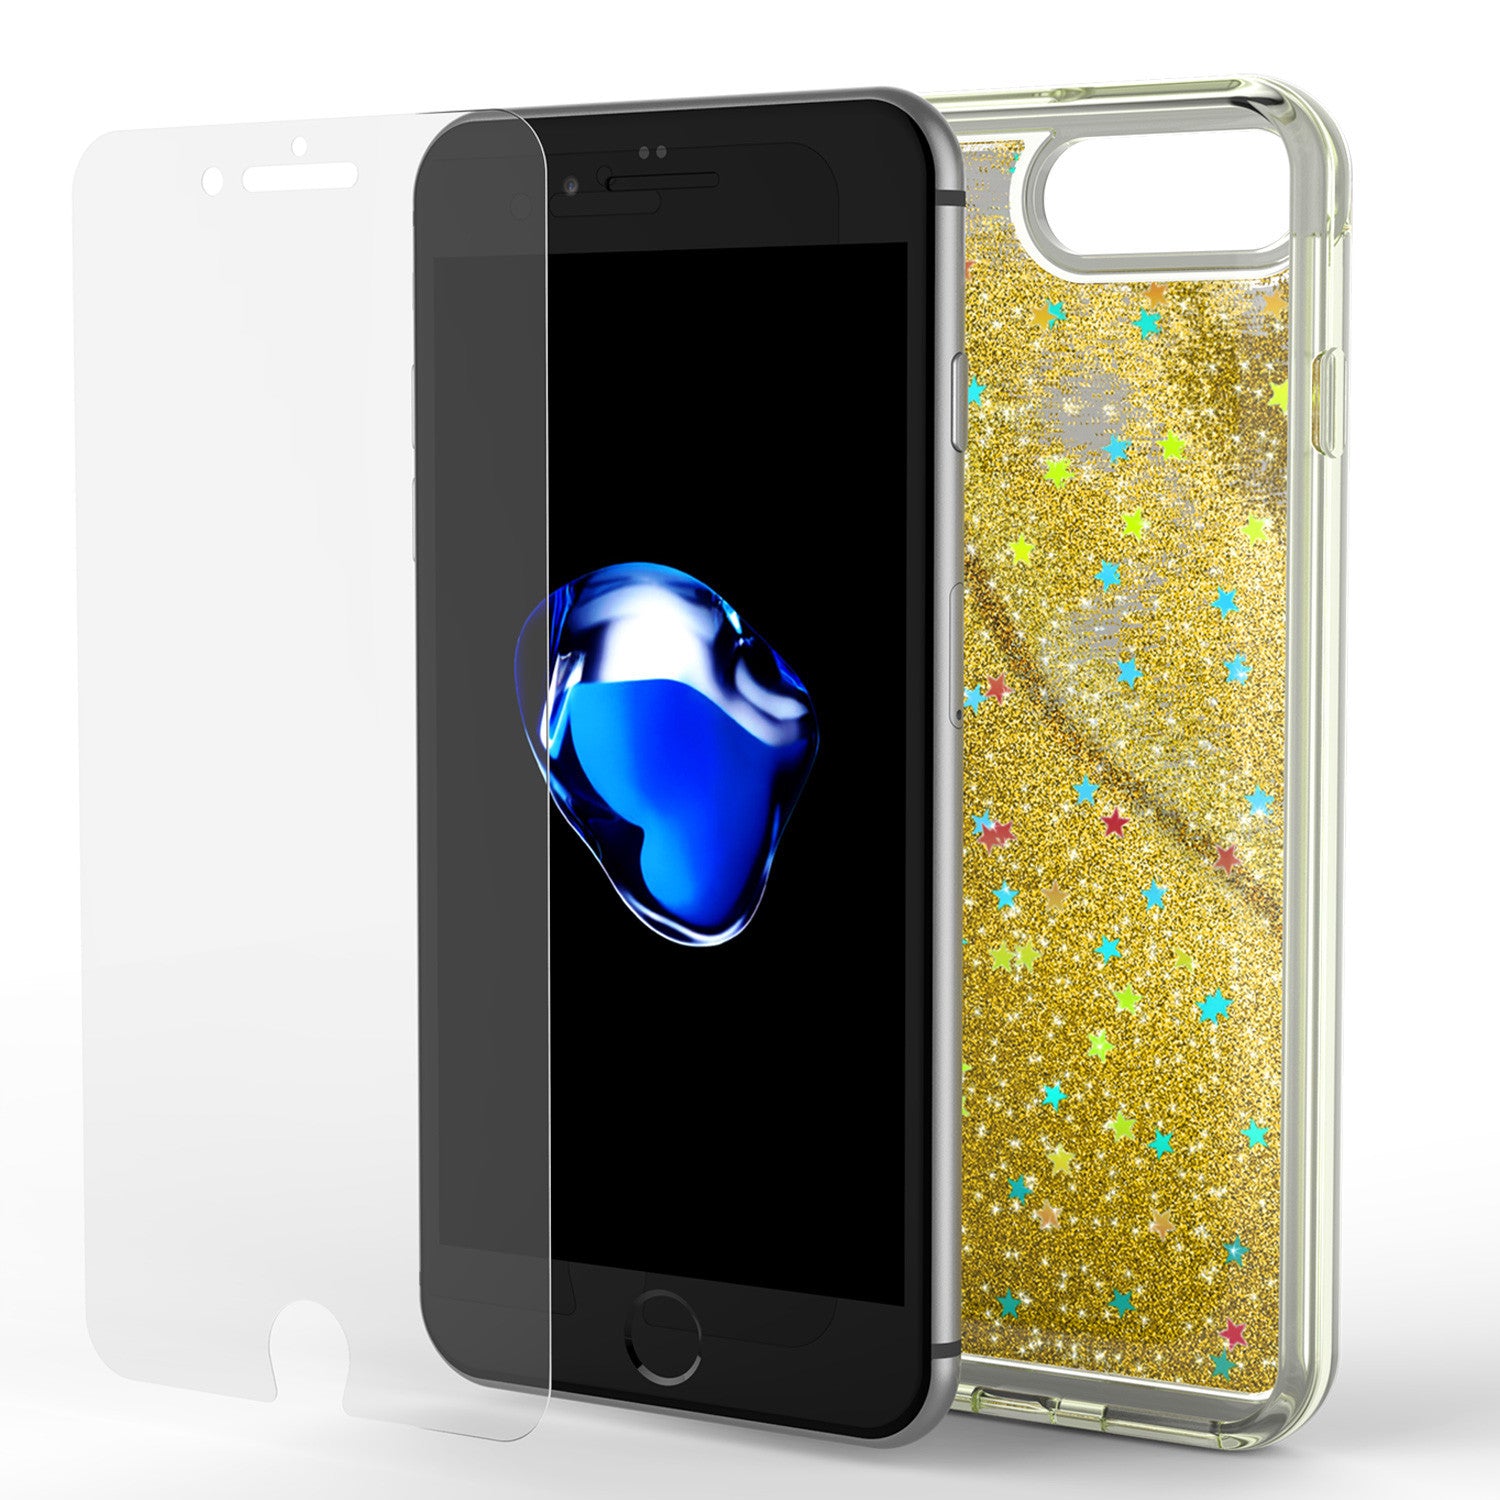 iPhone 7 Plus Case, PunkСase LIQUID Gold Series, Protective Dual Layer Floating Glitter Cover